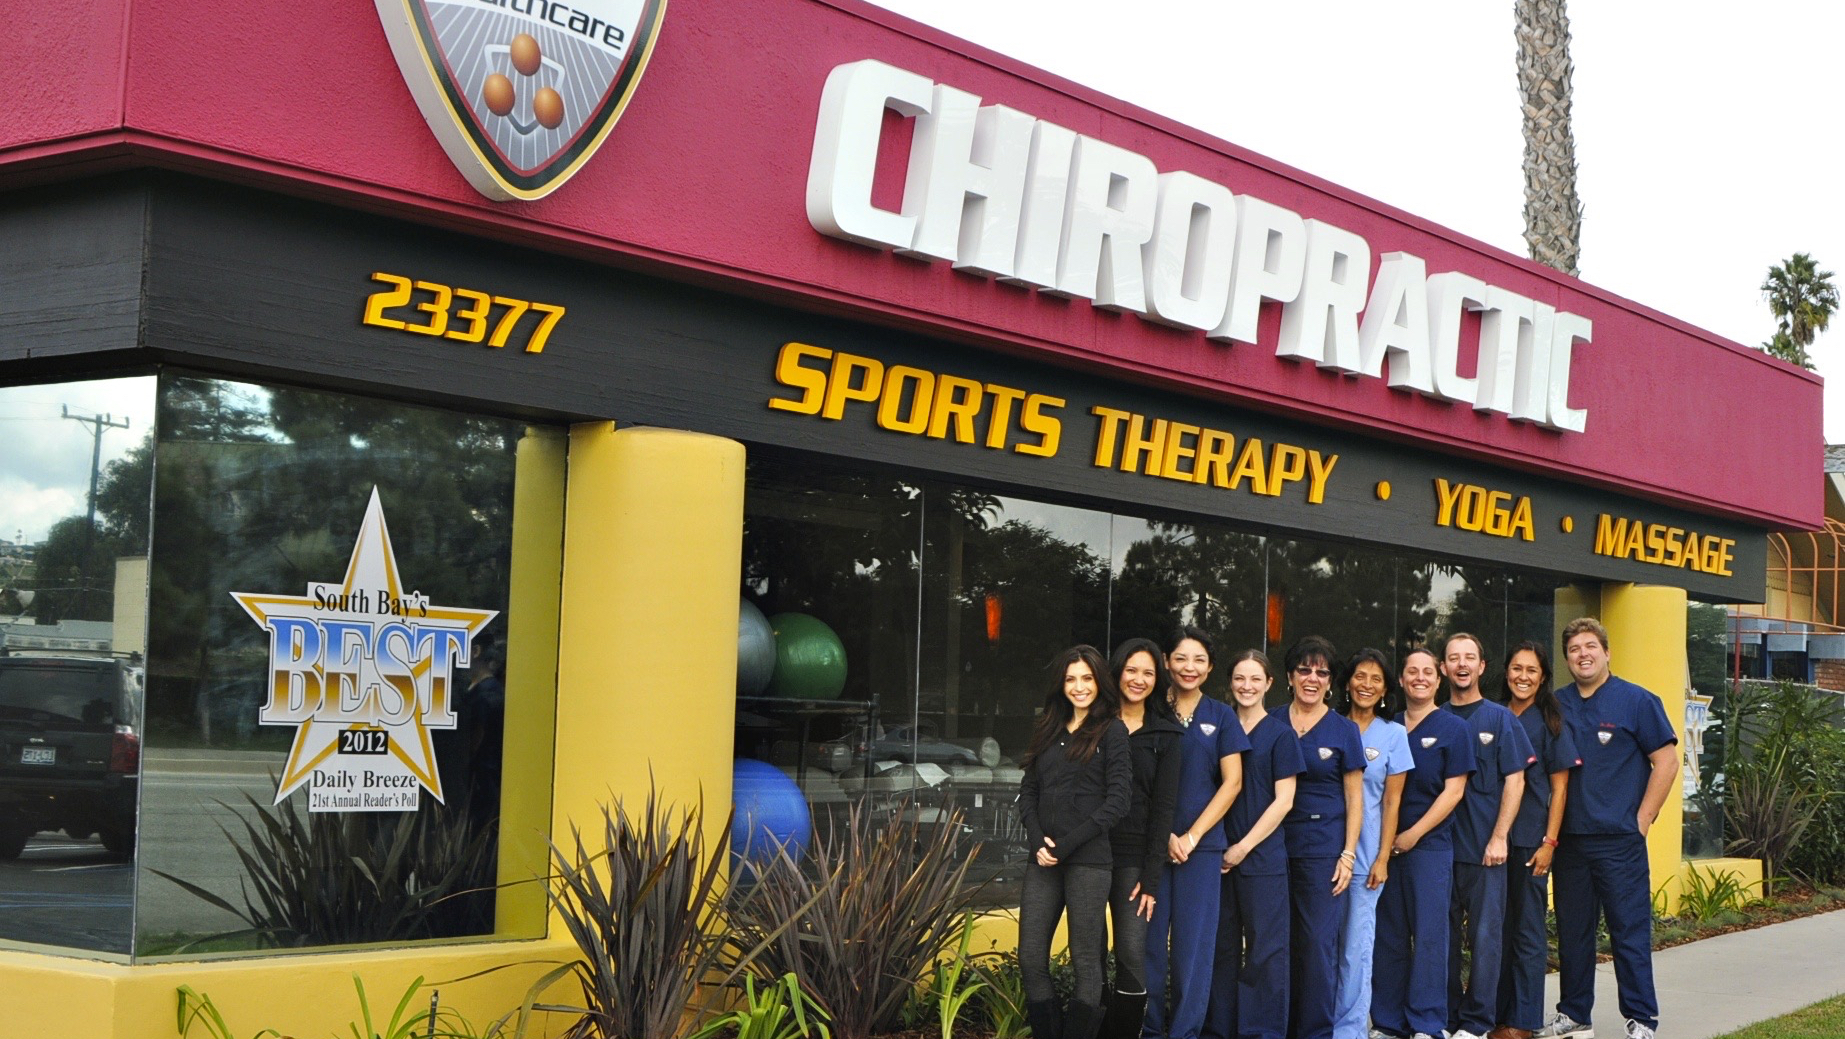 Back to Healthcare Chiropractic